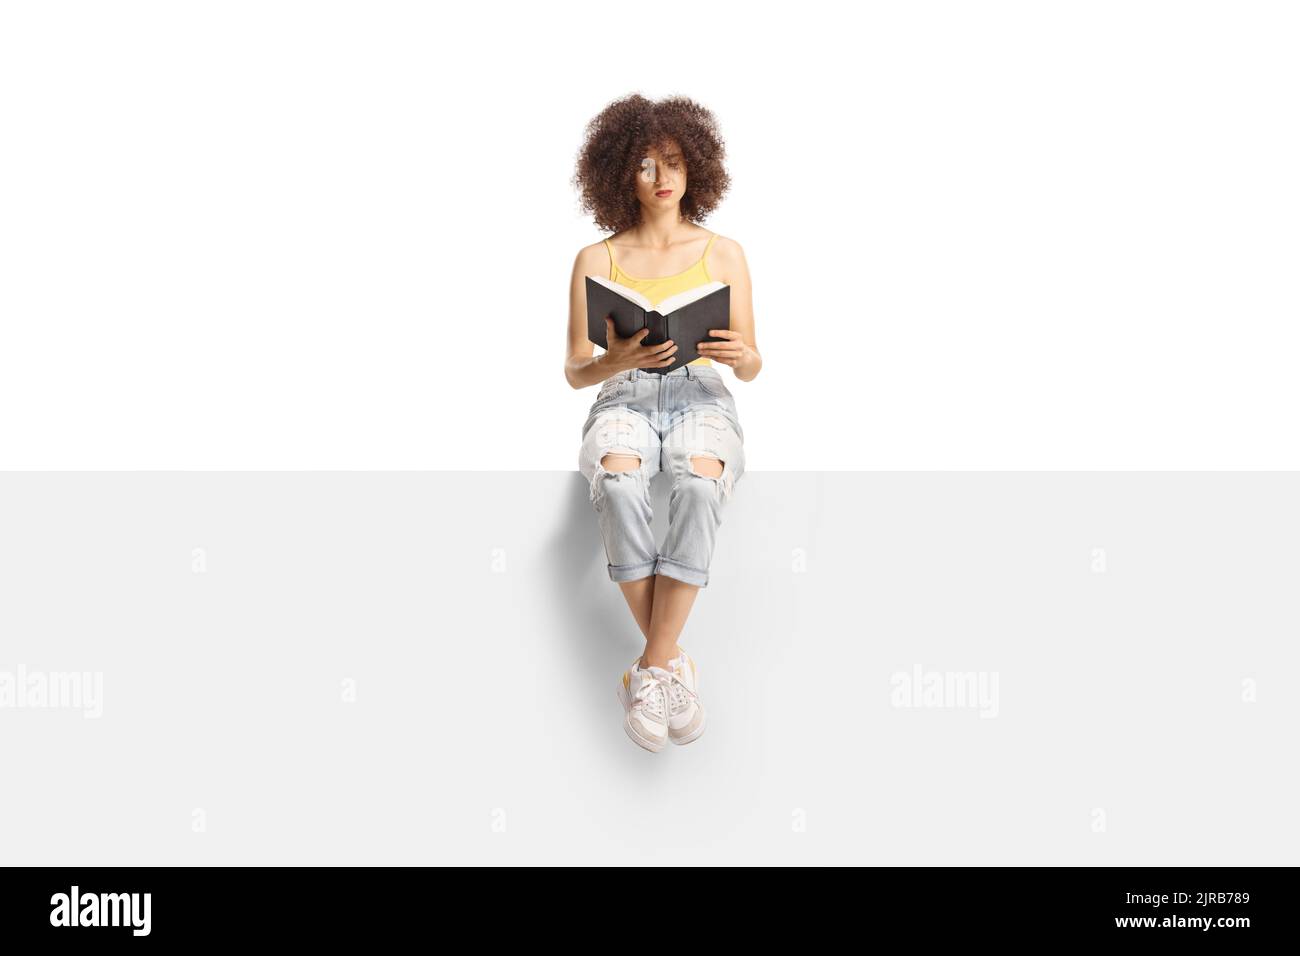 Young woman with curly hair sitting on a panel and reading a book isolated on white background Stock Photo